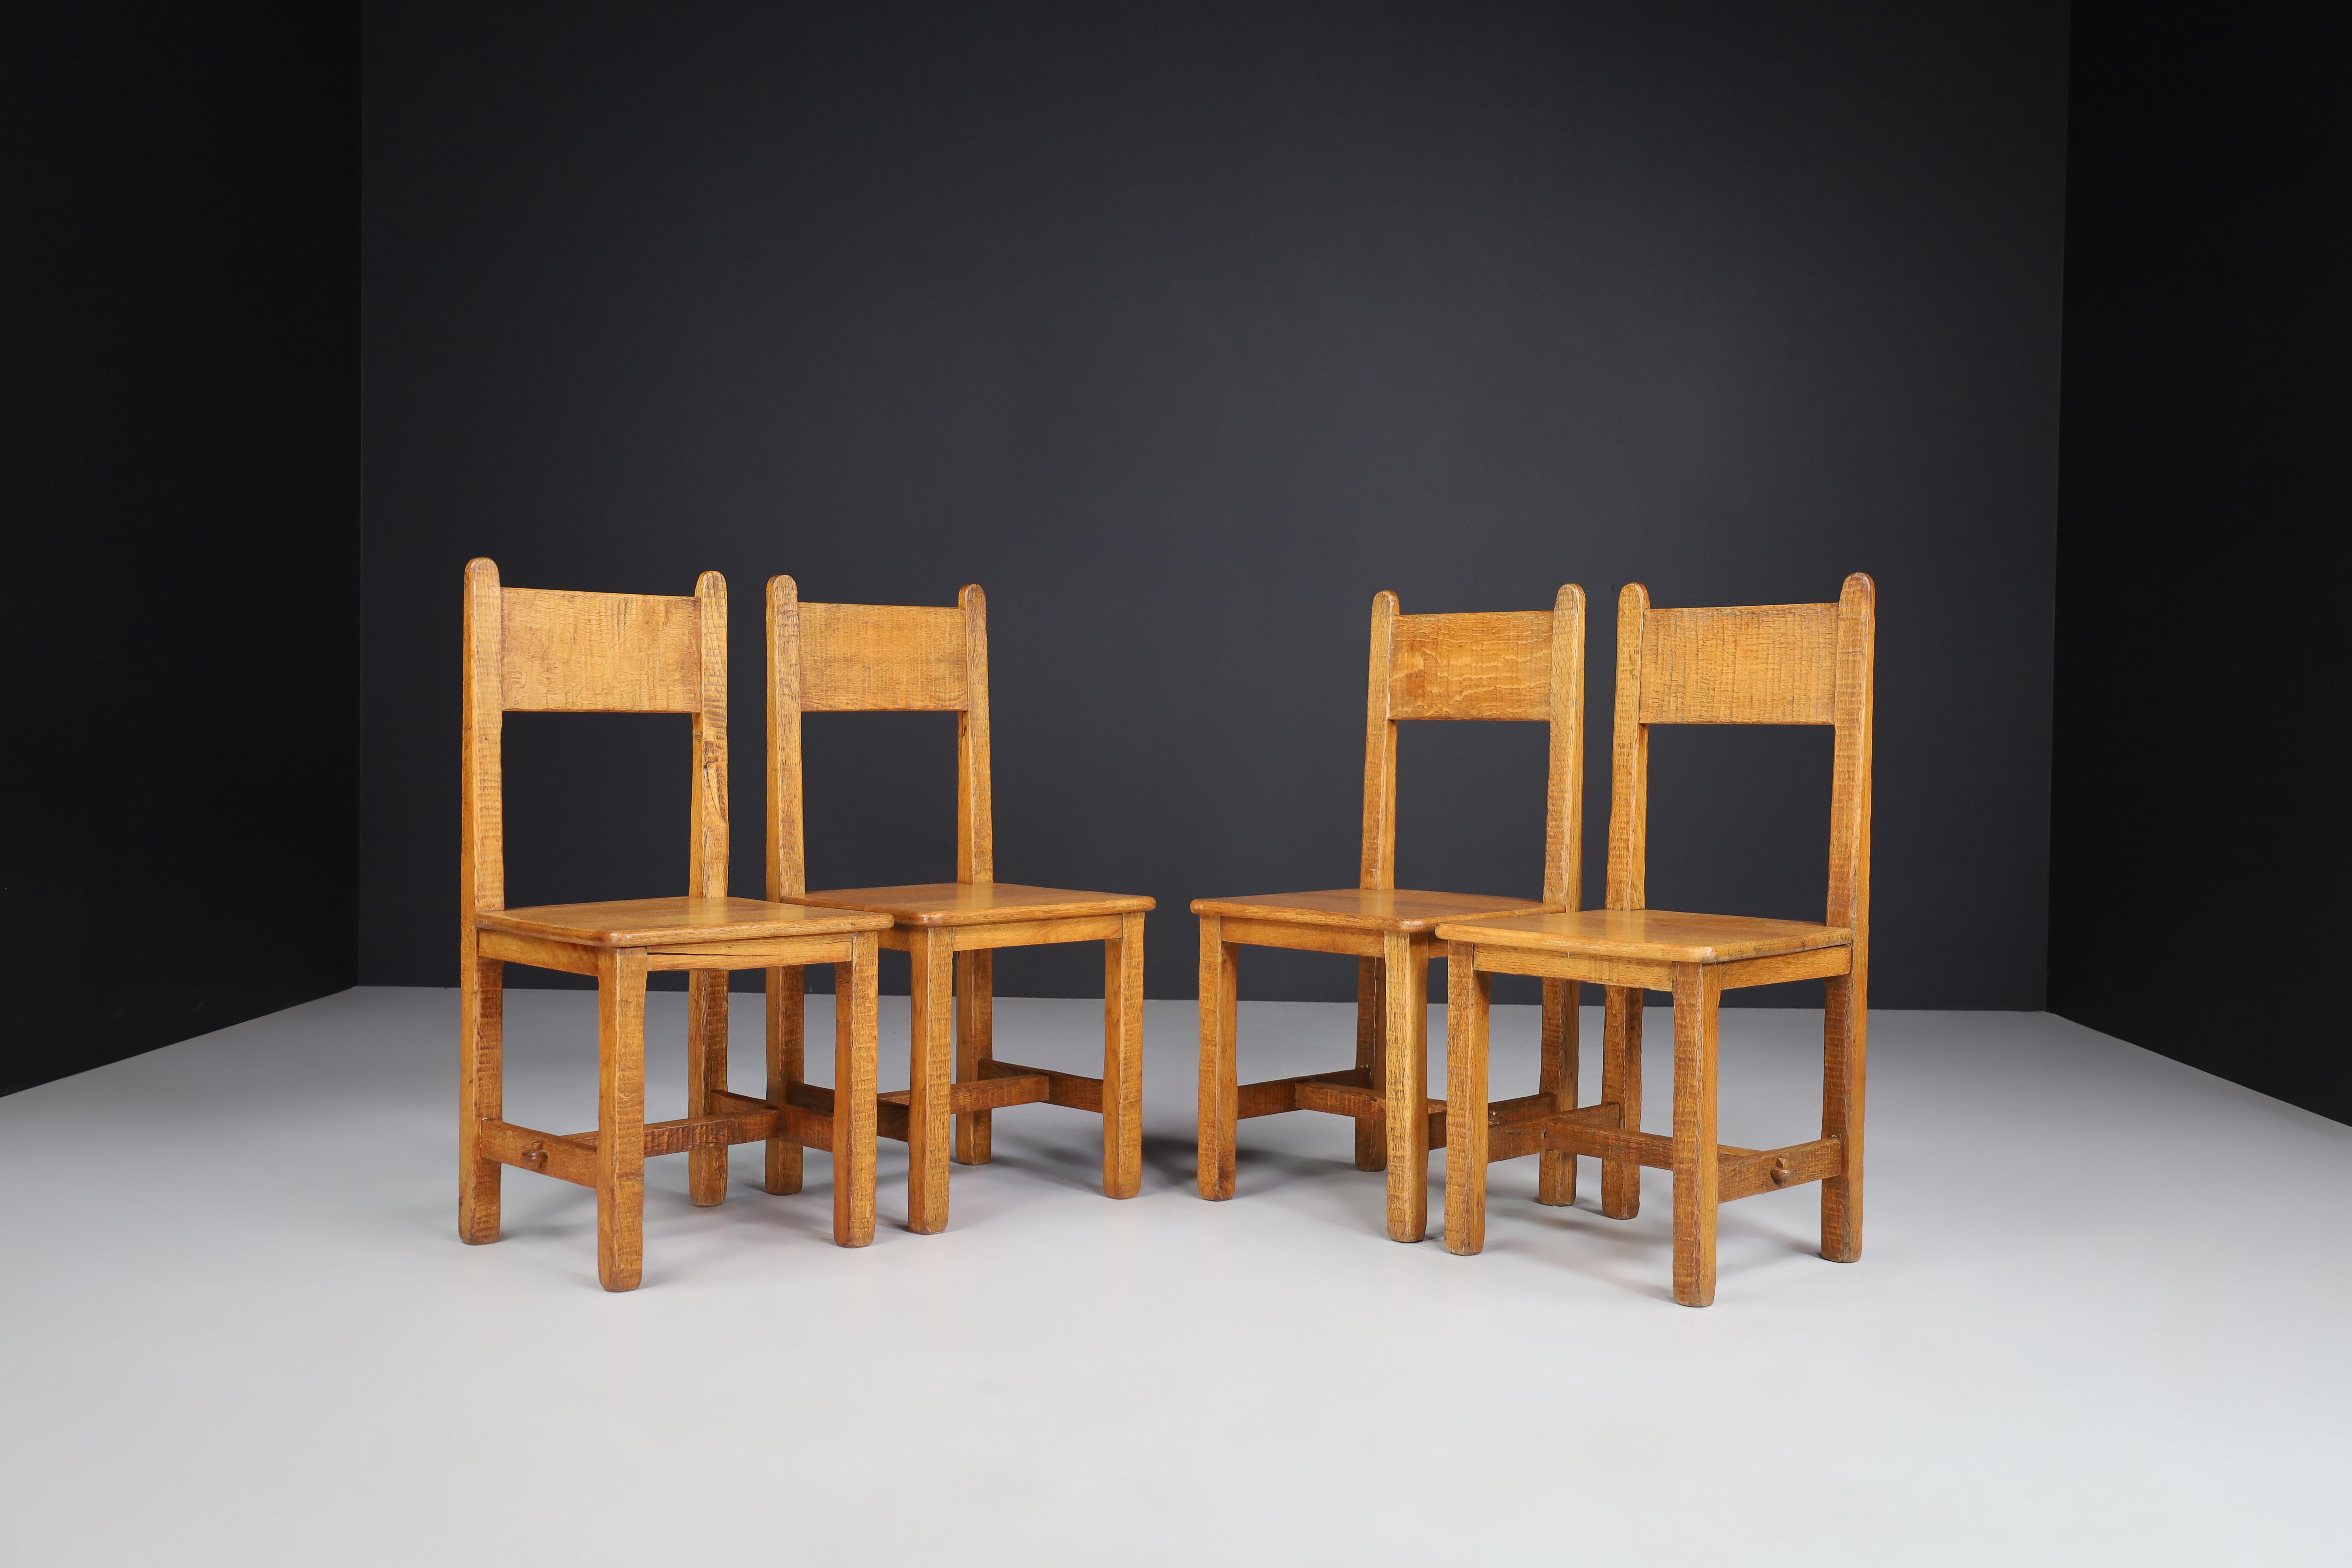 Set of four primitive chairs in patinated oak, France 1950s.

Set of four primitive chairs in solid oak France 1950s. These chairs are in original and untouched condition, with amazing original patina. These particular chairs are as solid and